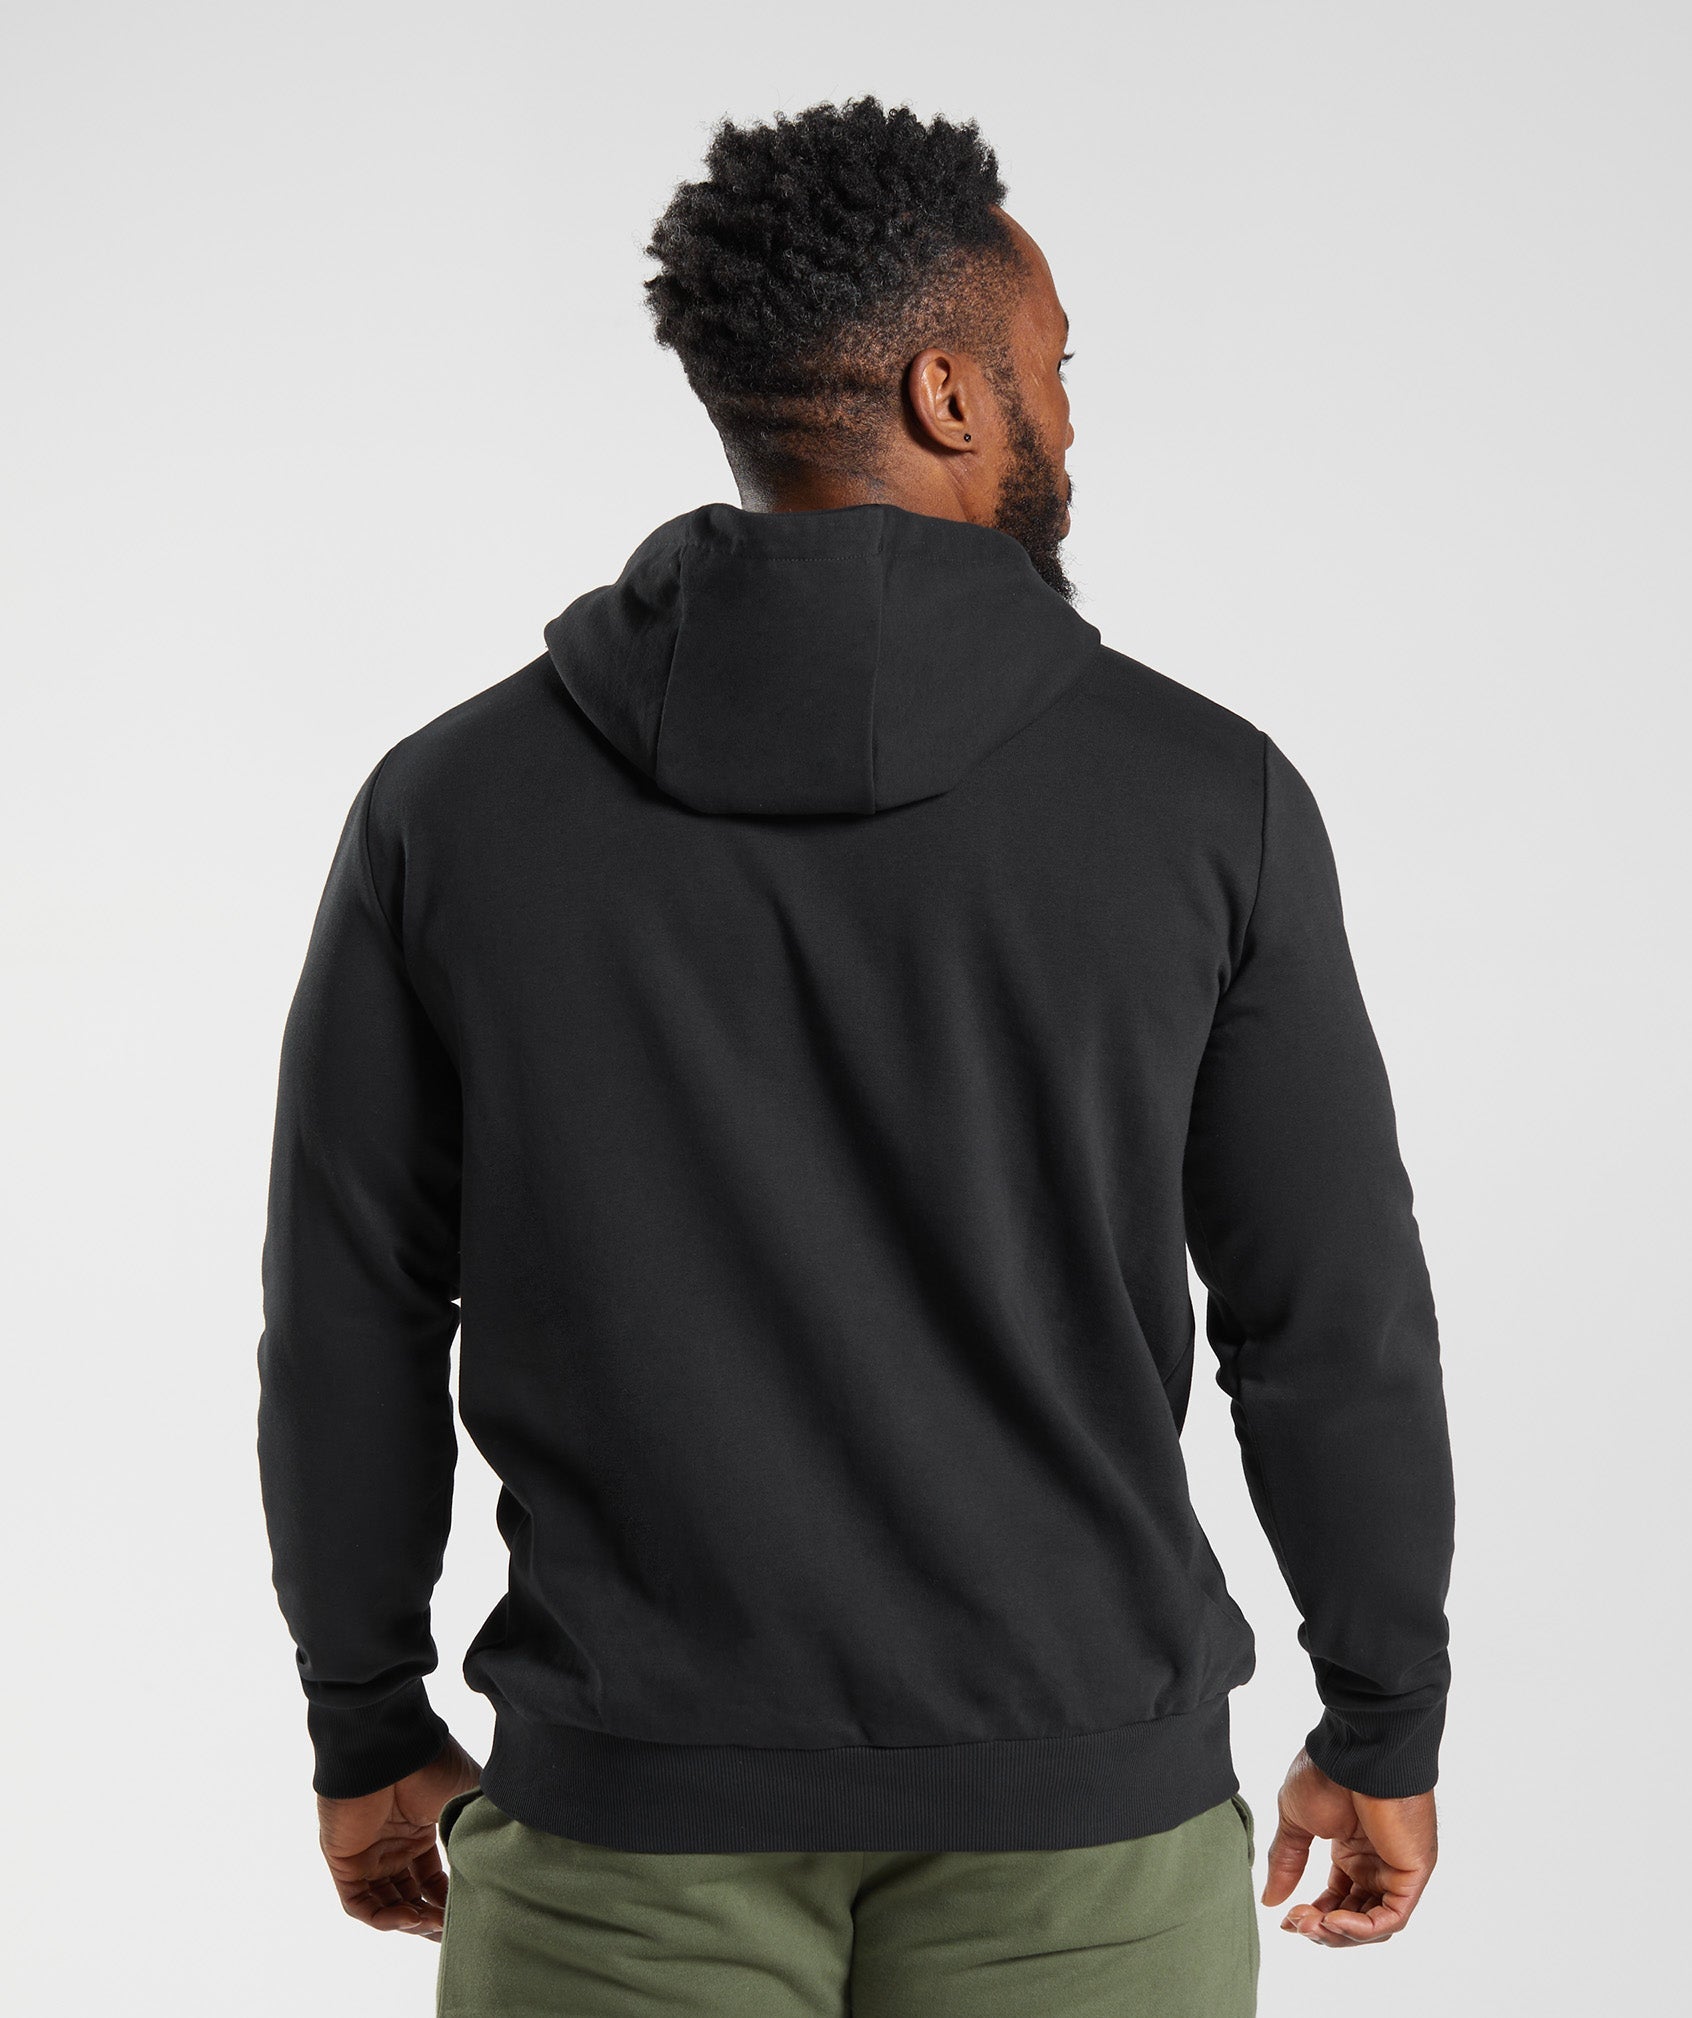 Gone Liftin' Graphic Hoodie in Black - view 2